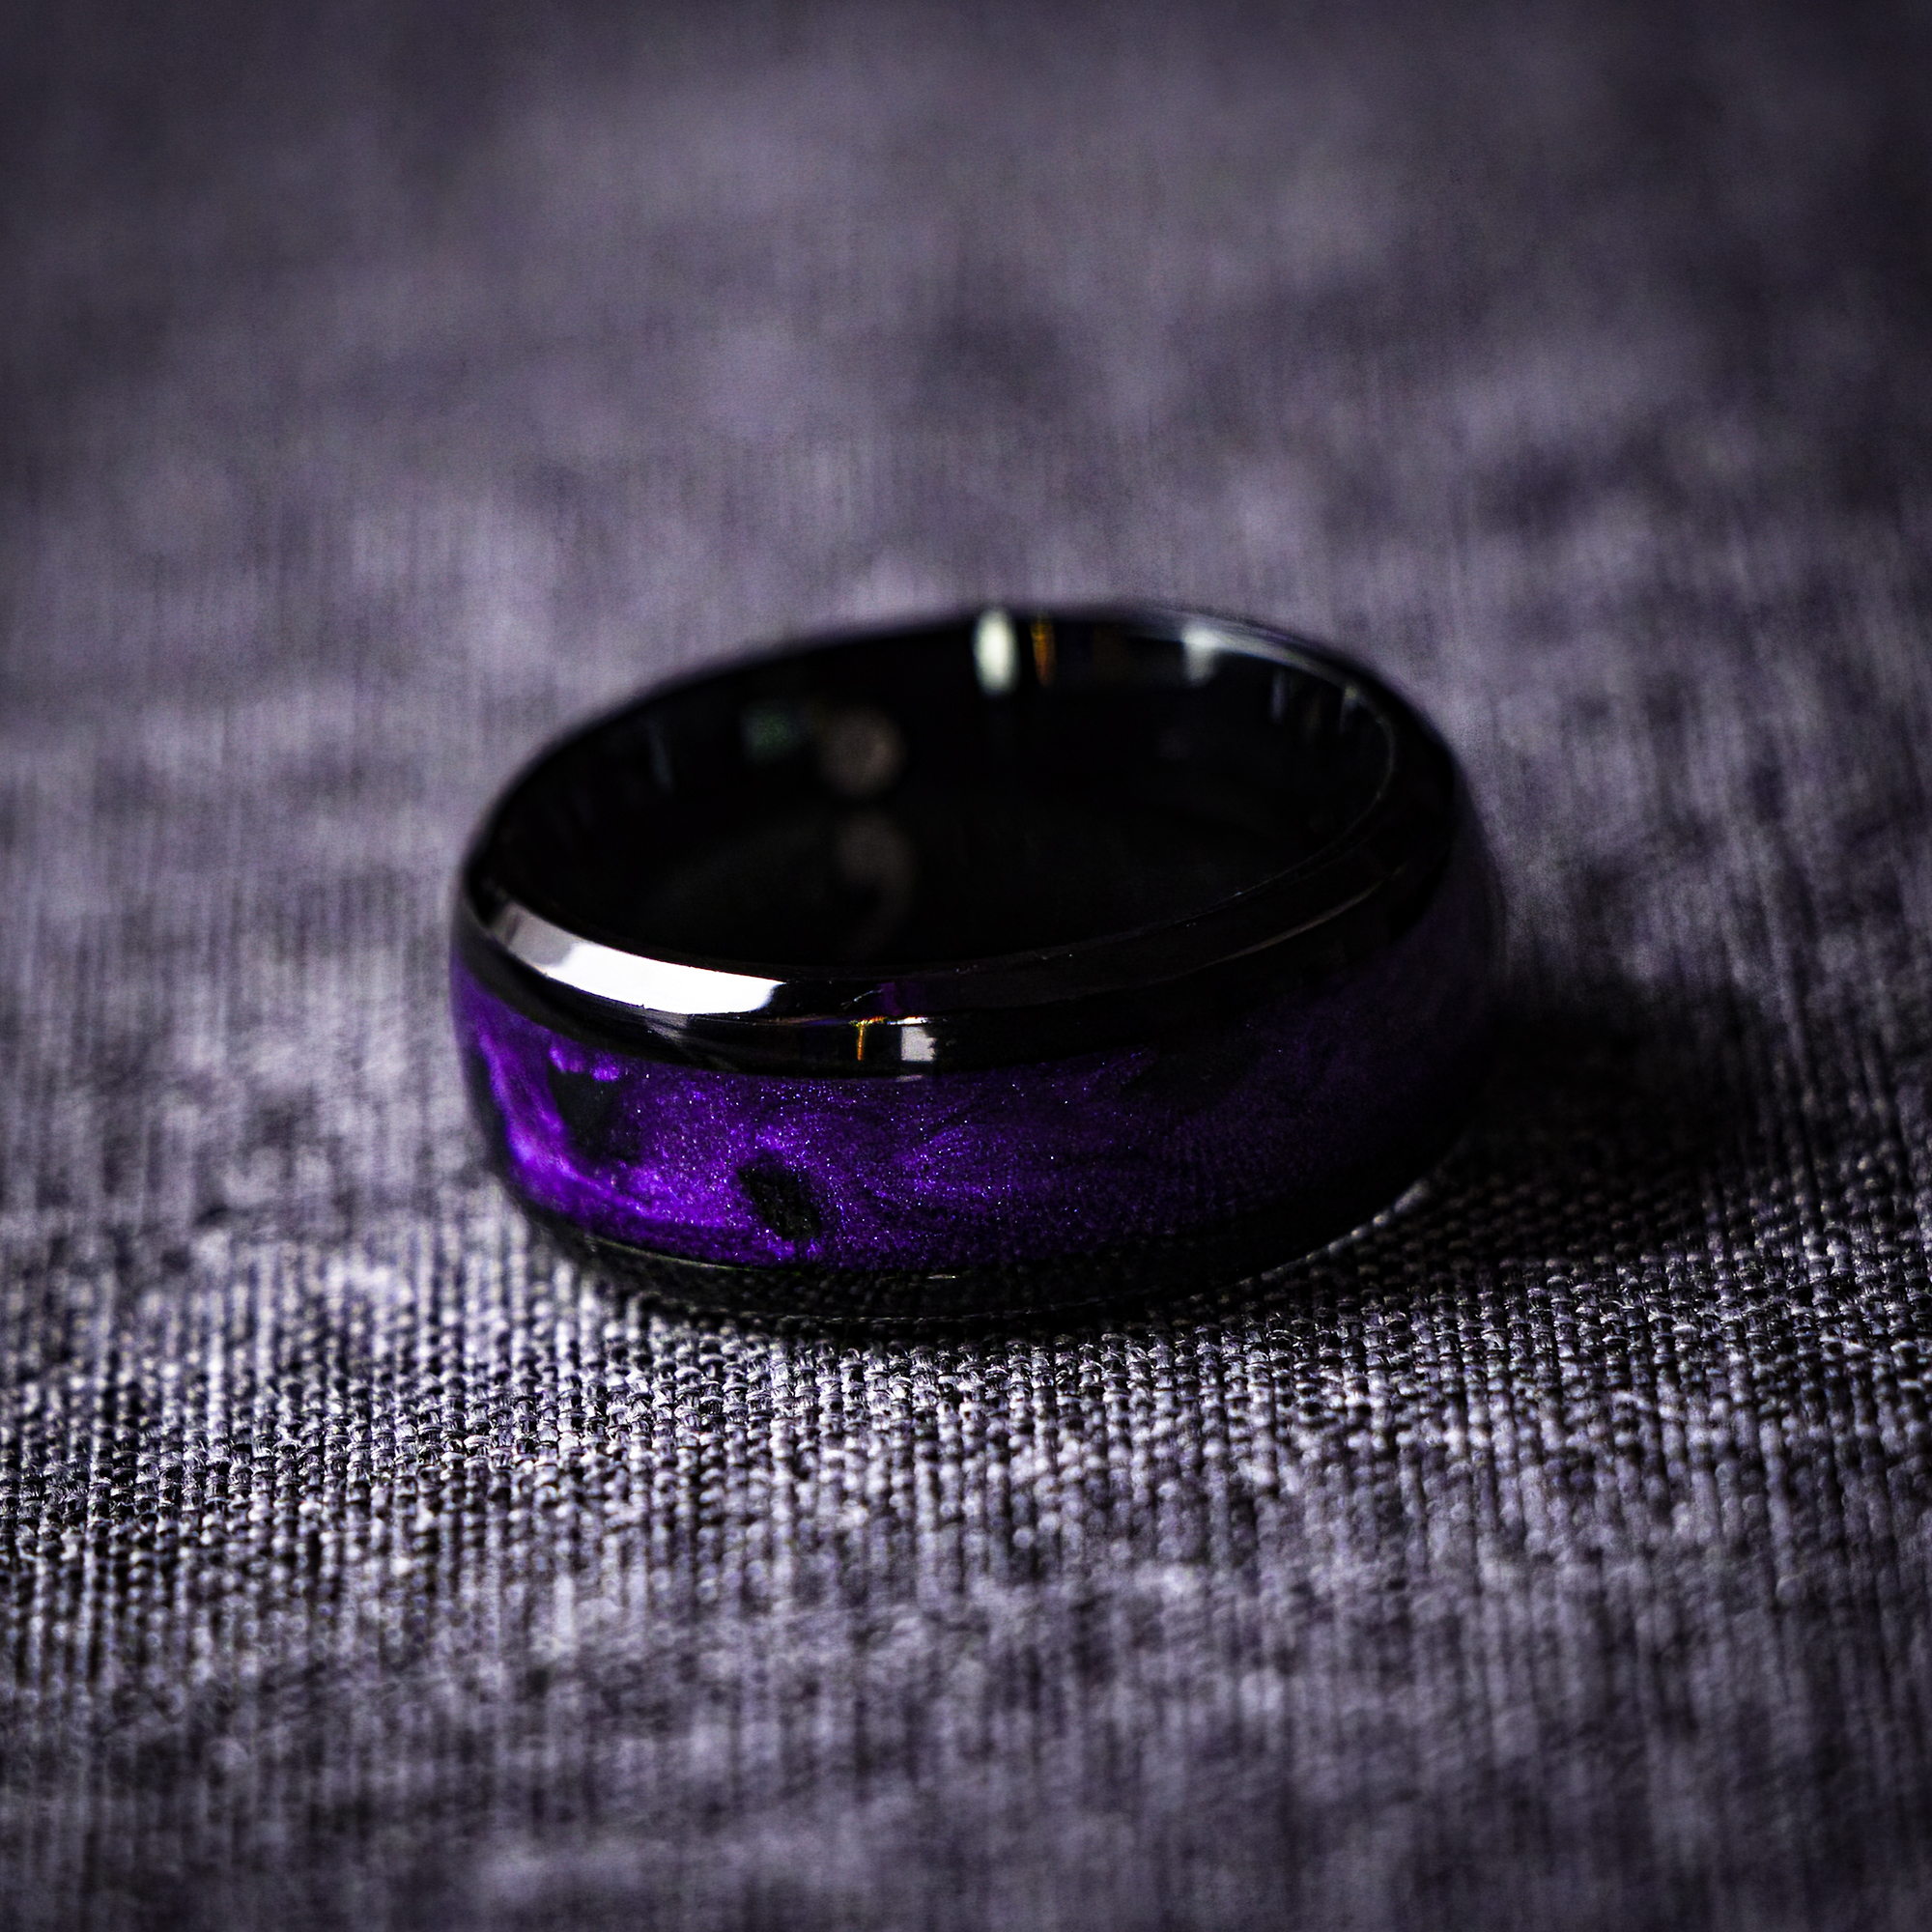 A black ring with iridescent violet pigments and pieces of black onyx stone inlaid around the band, creating a textured and organic pattern.